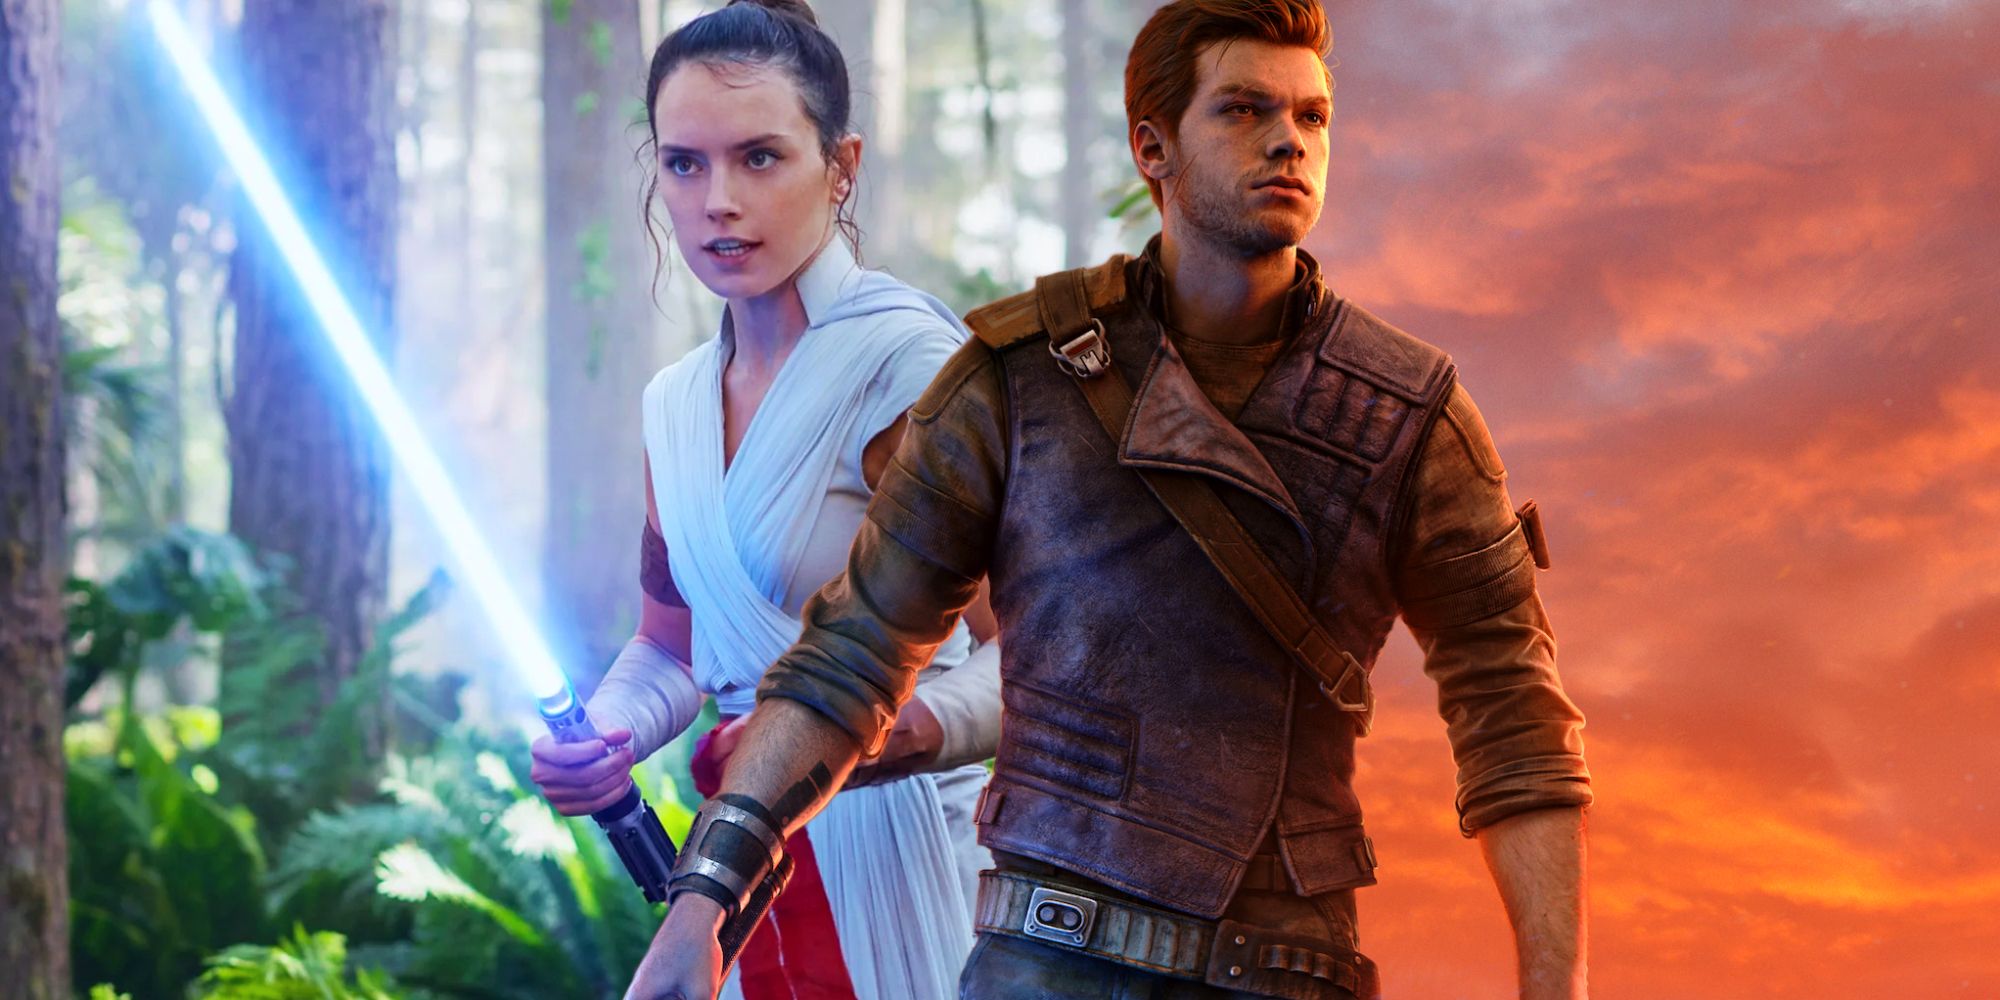 Rey holding a lightsaber in the woods behind Cal Kestis in Jedi: survivor's key art, with a bright orange sky behind him.